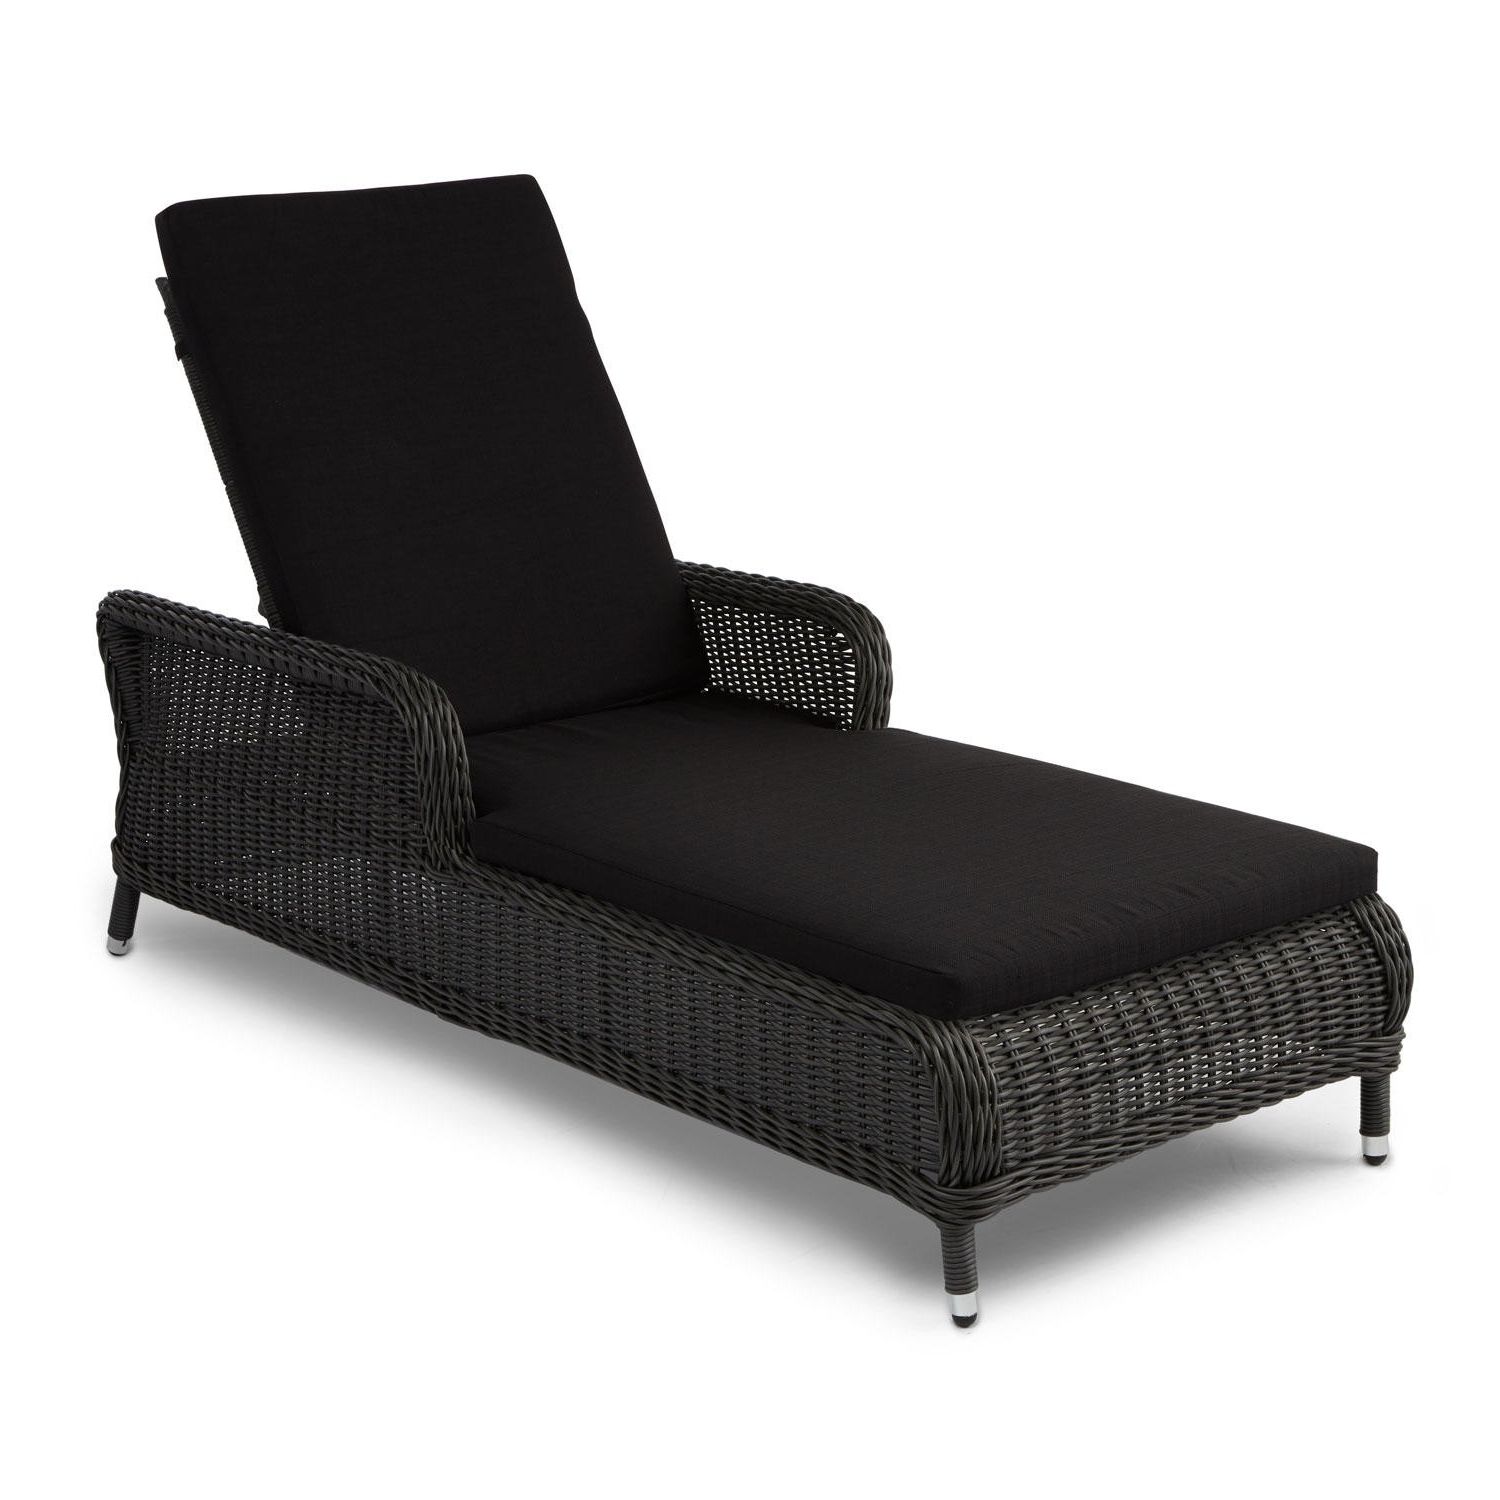 Eye Catching Wicker Chaise Lounge Chair Black Reviravoltta Com For Recent Eliana Outdoor Brown Wicker Chaise Lounge Chairs (View 12 of 15)